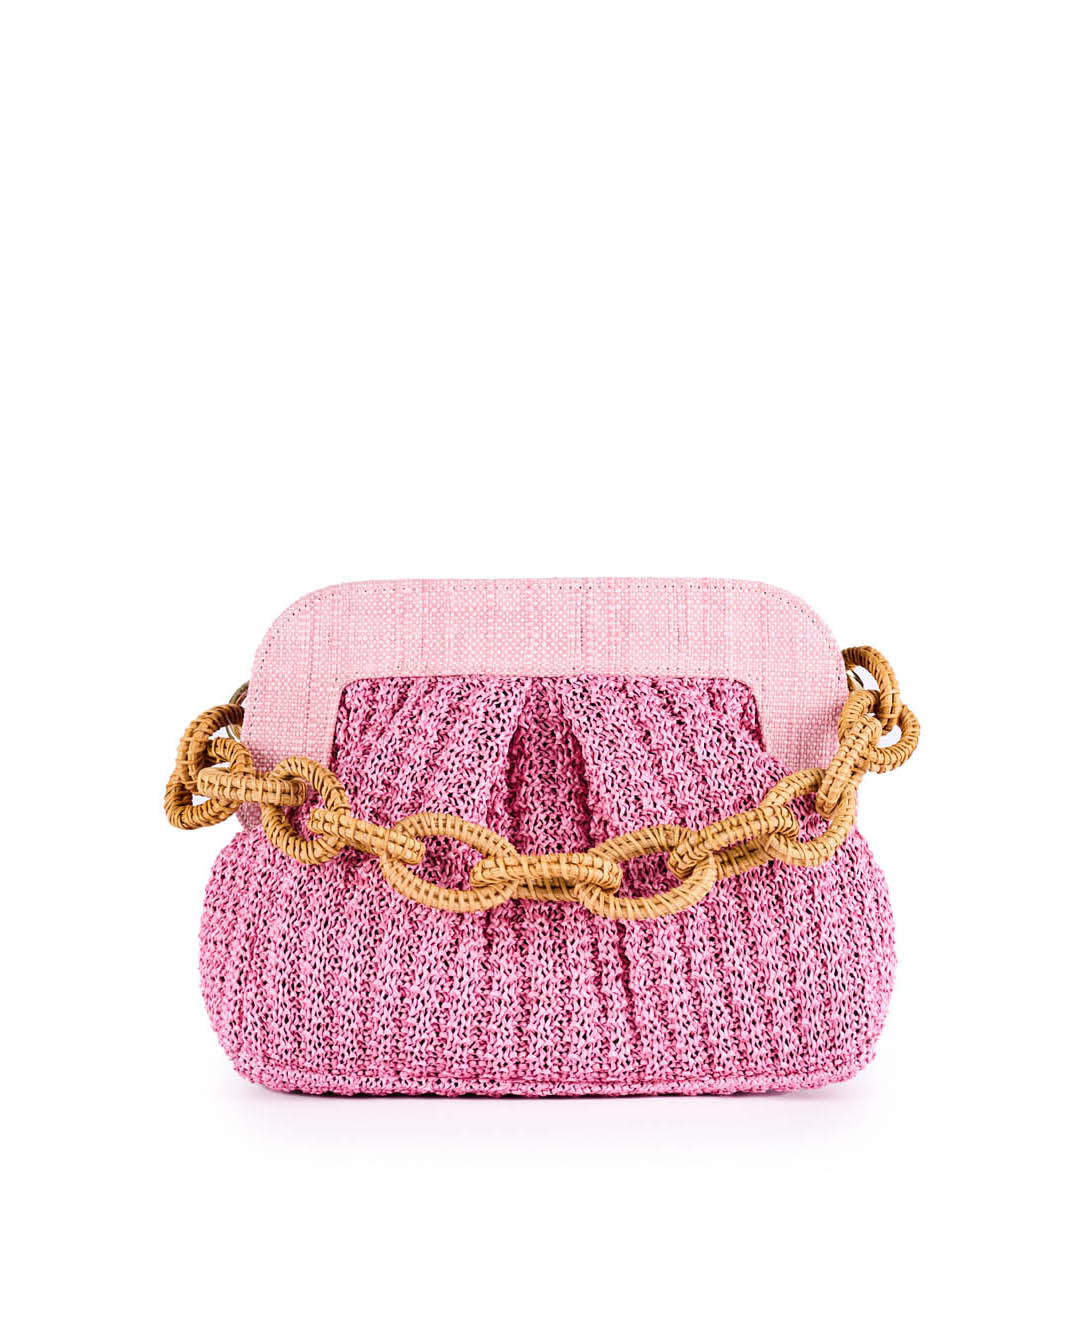 Pink knitted handbag with gold chain strap on white background